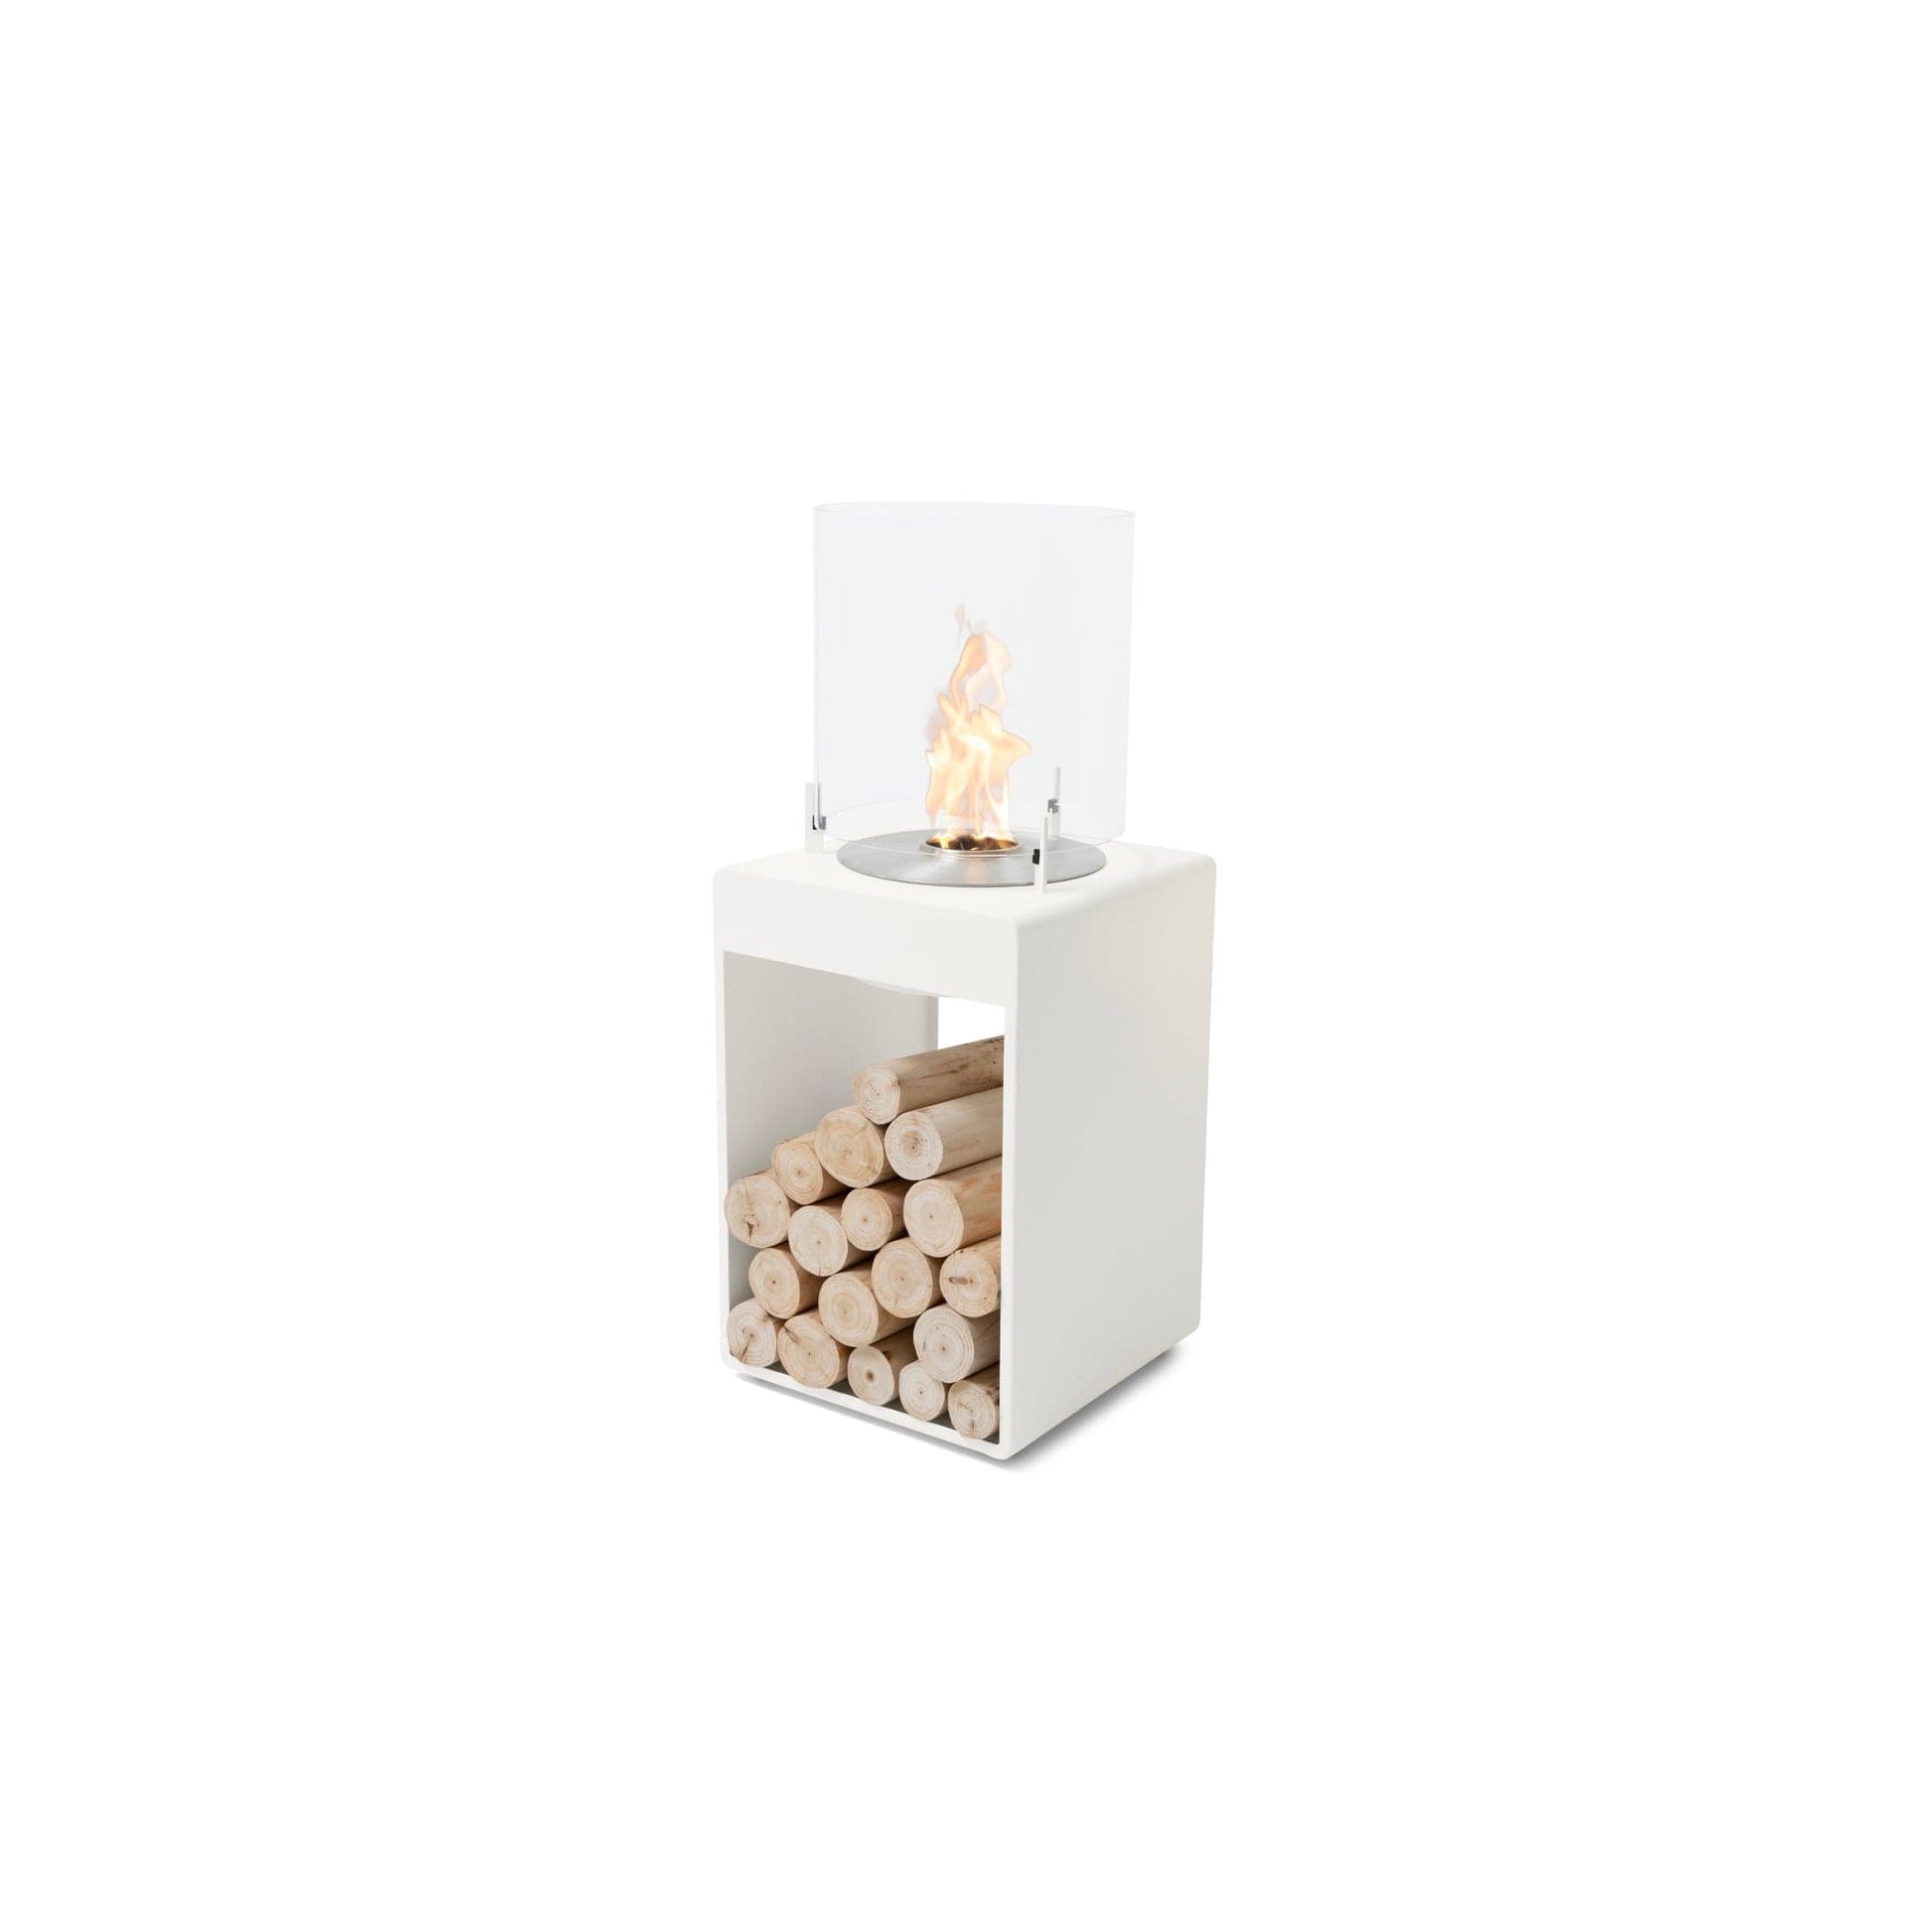 EcoSmart Fire POP 3T 33" White Freestanding Designer Fireplace with Stainless Steel Burner by MAD Design Group